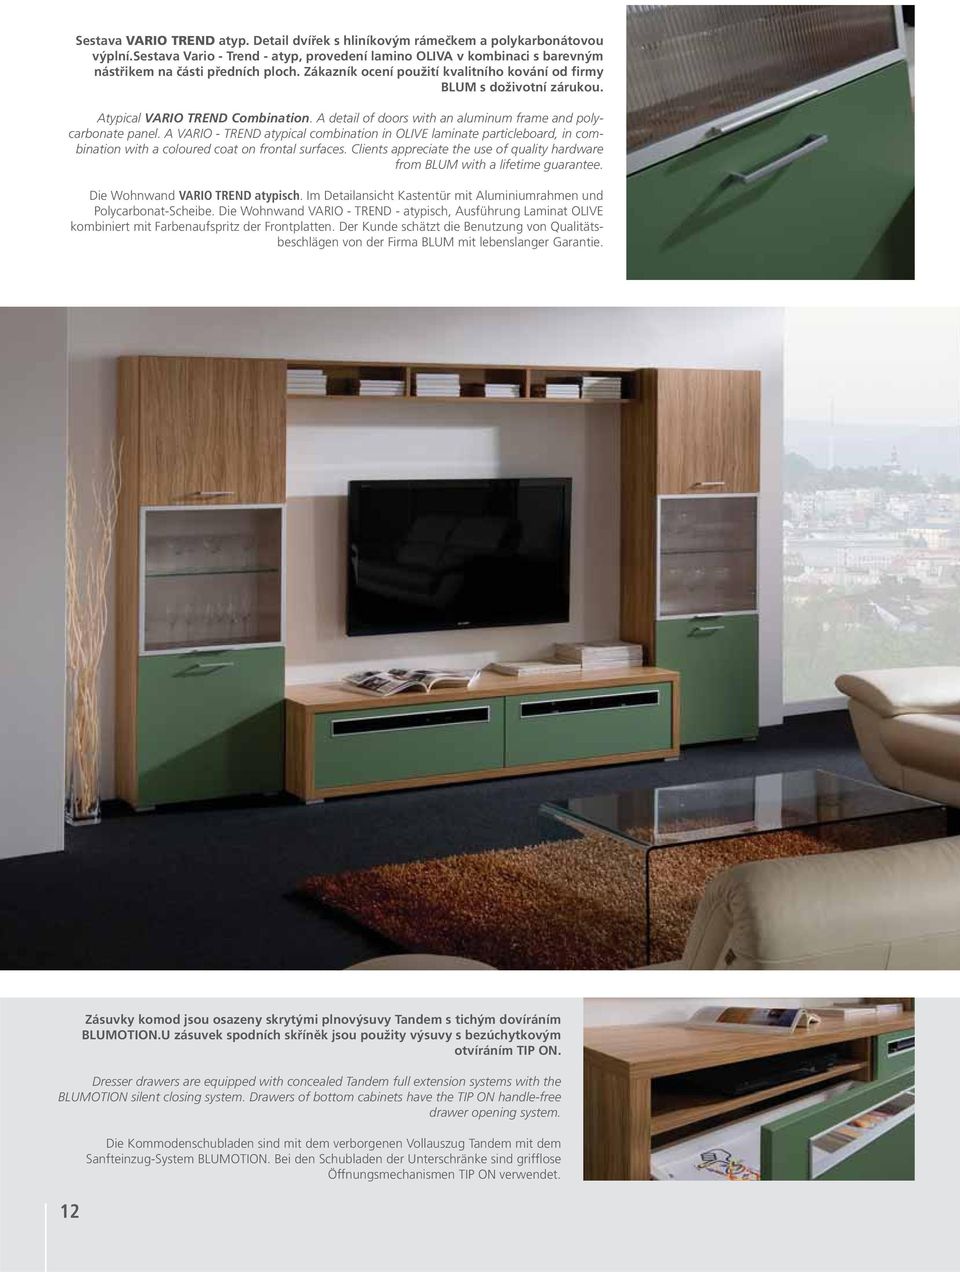 A VARIO - TREND atypical combination in OLIVE laminate particleboard, in combination with a coloured coat on frontal surfaces.